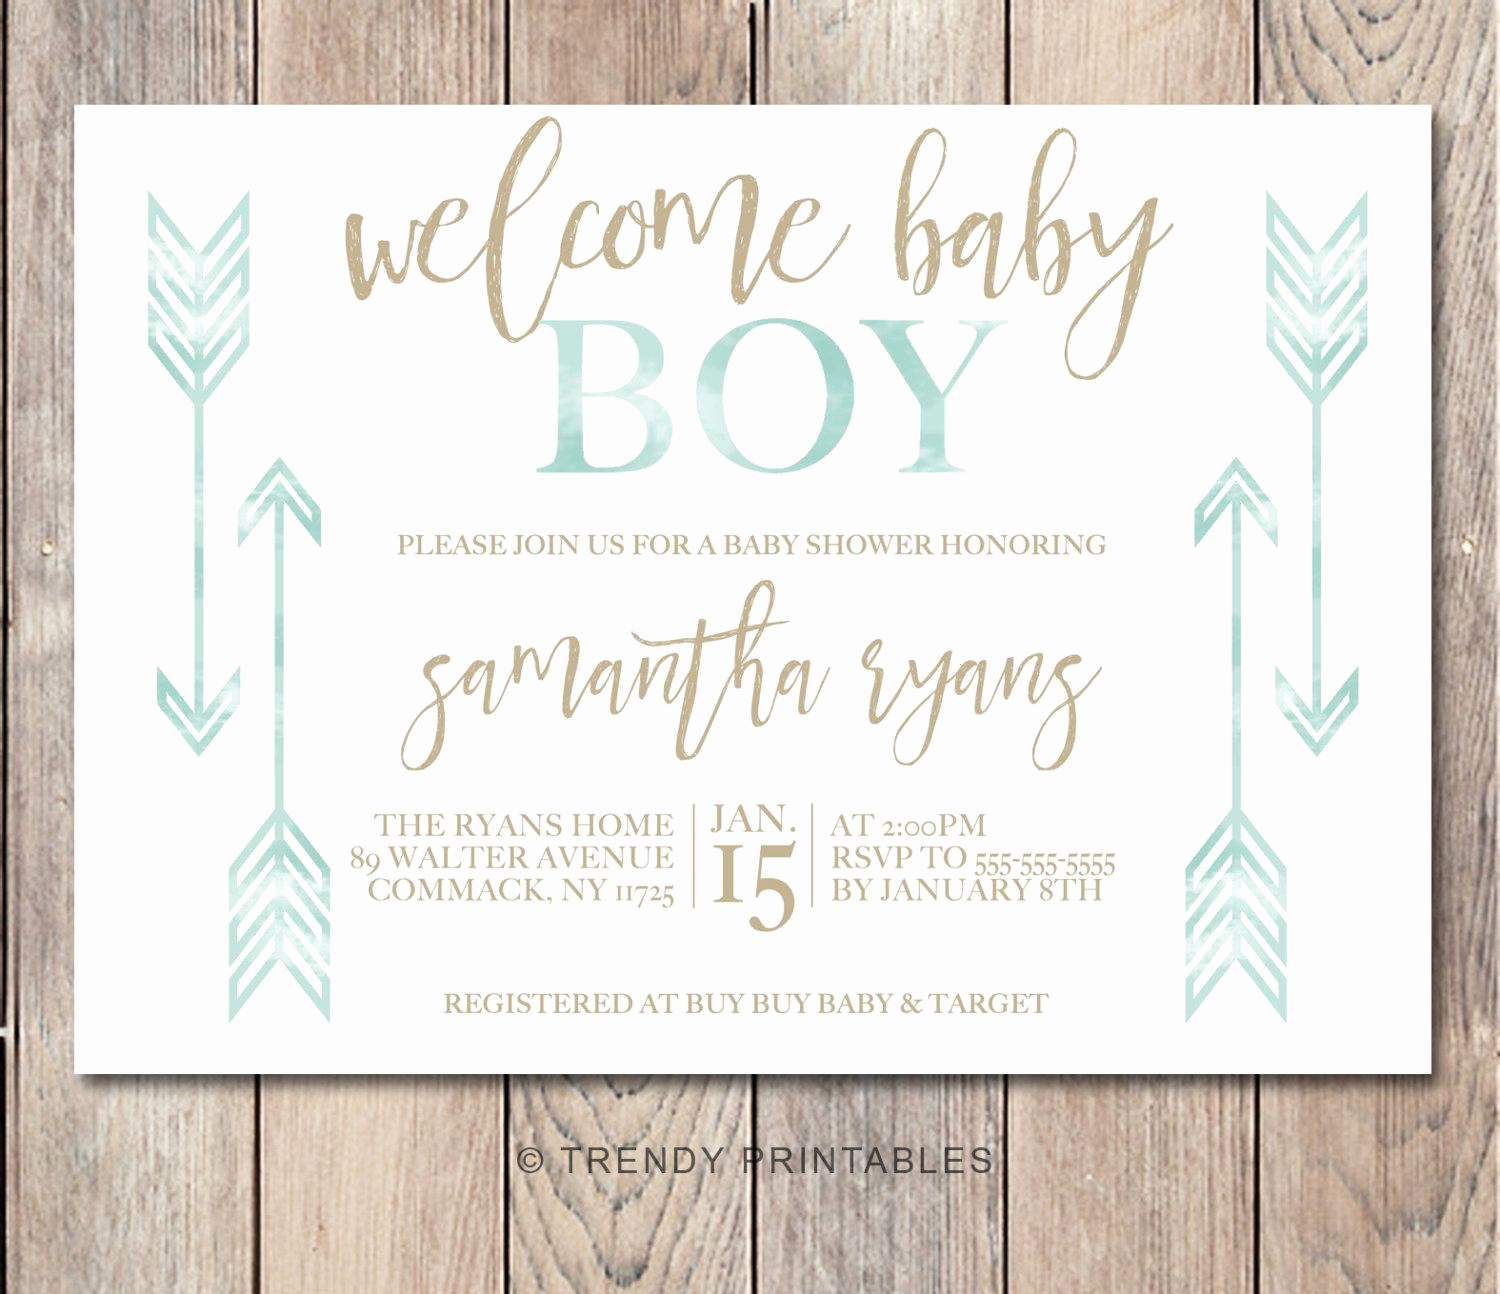 Baby Boy Shower Invitation Ideas Lovely Blank Invitation Templates Free for Word Free Line